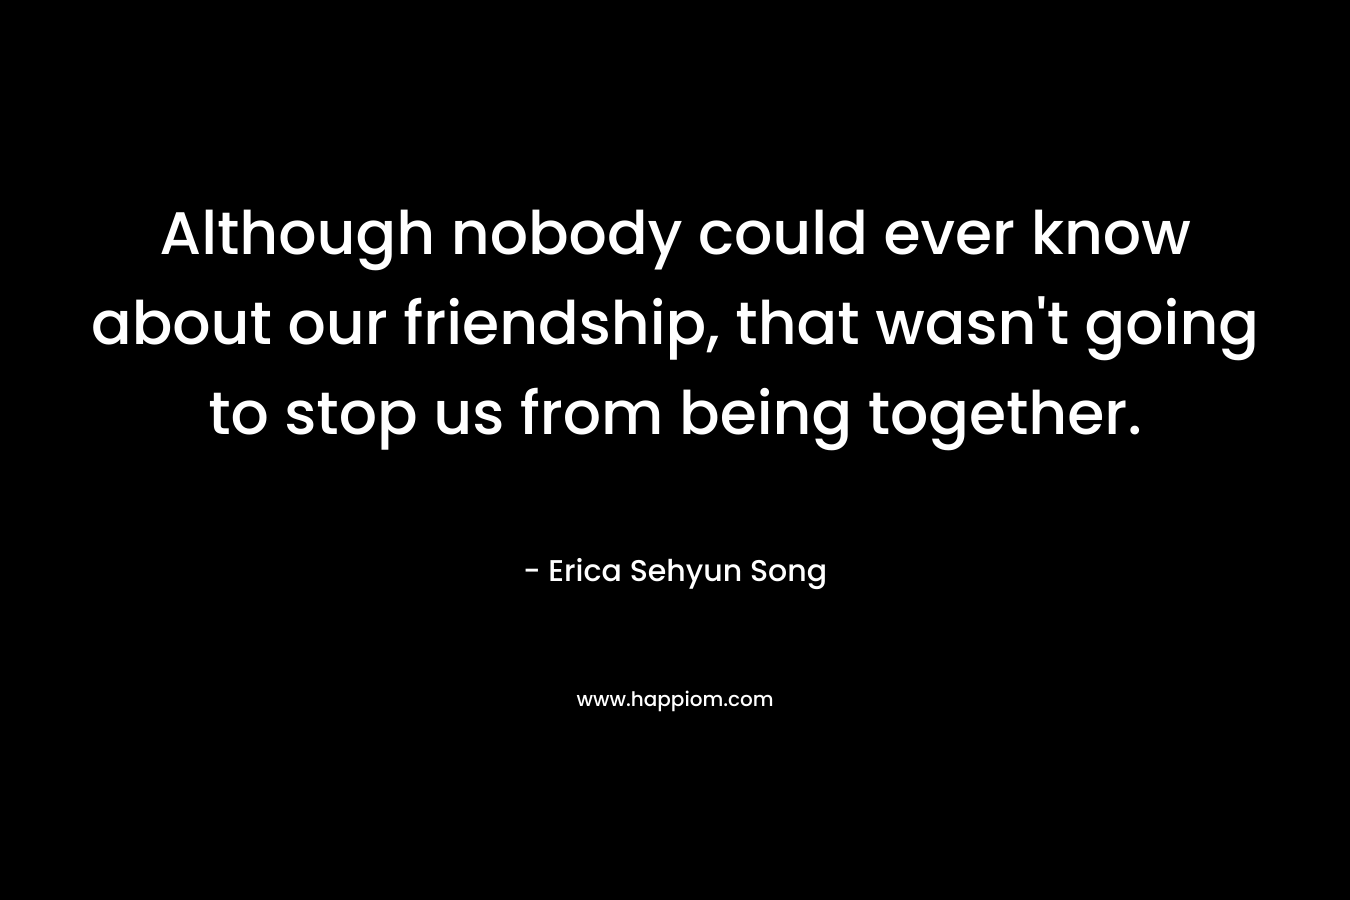 Although nobody could ever know about our friendship, that wasn’t going to stop us from being together. – Erica Sehyun Song